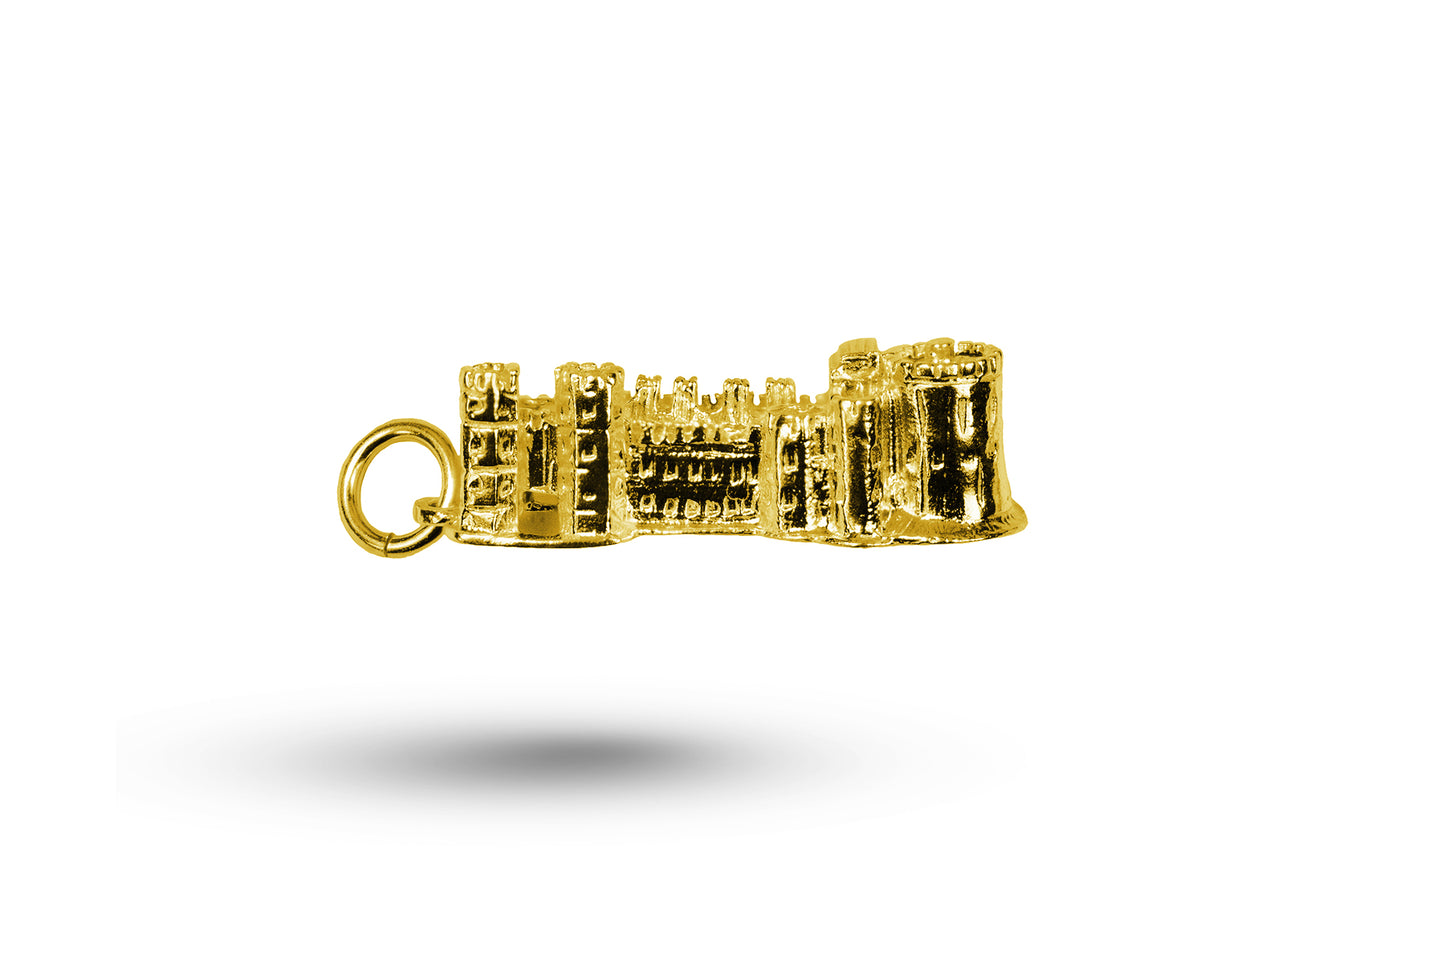 Yellow gold Windsor Castle charm.